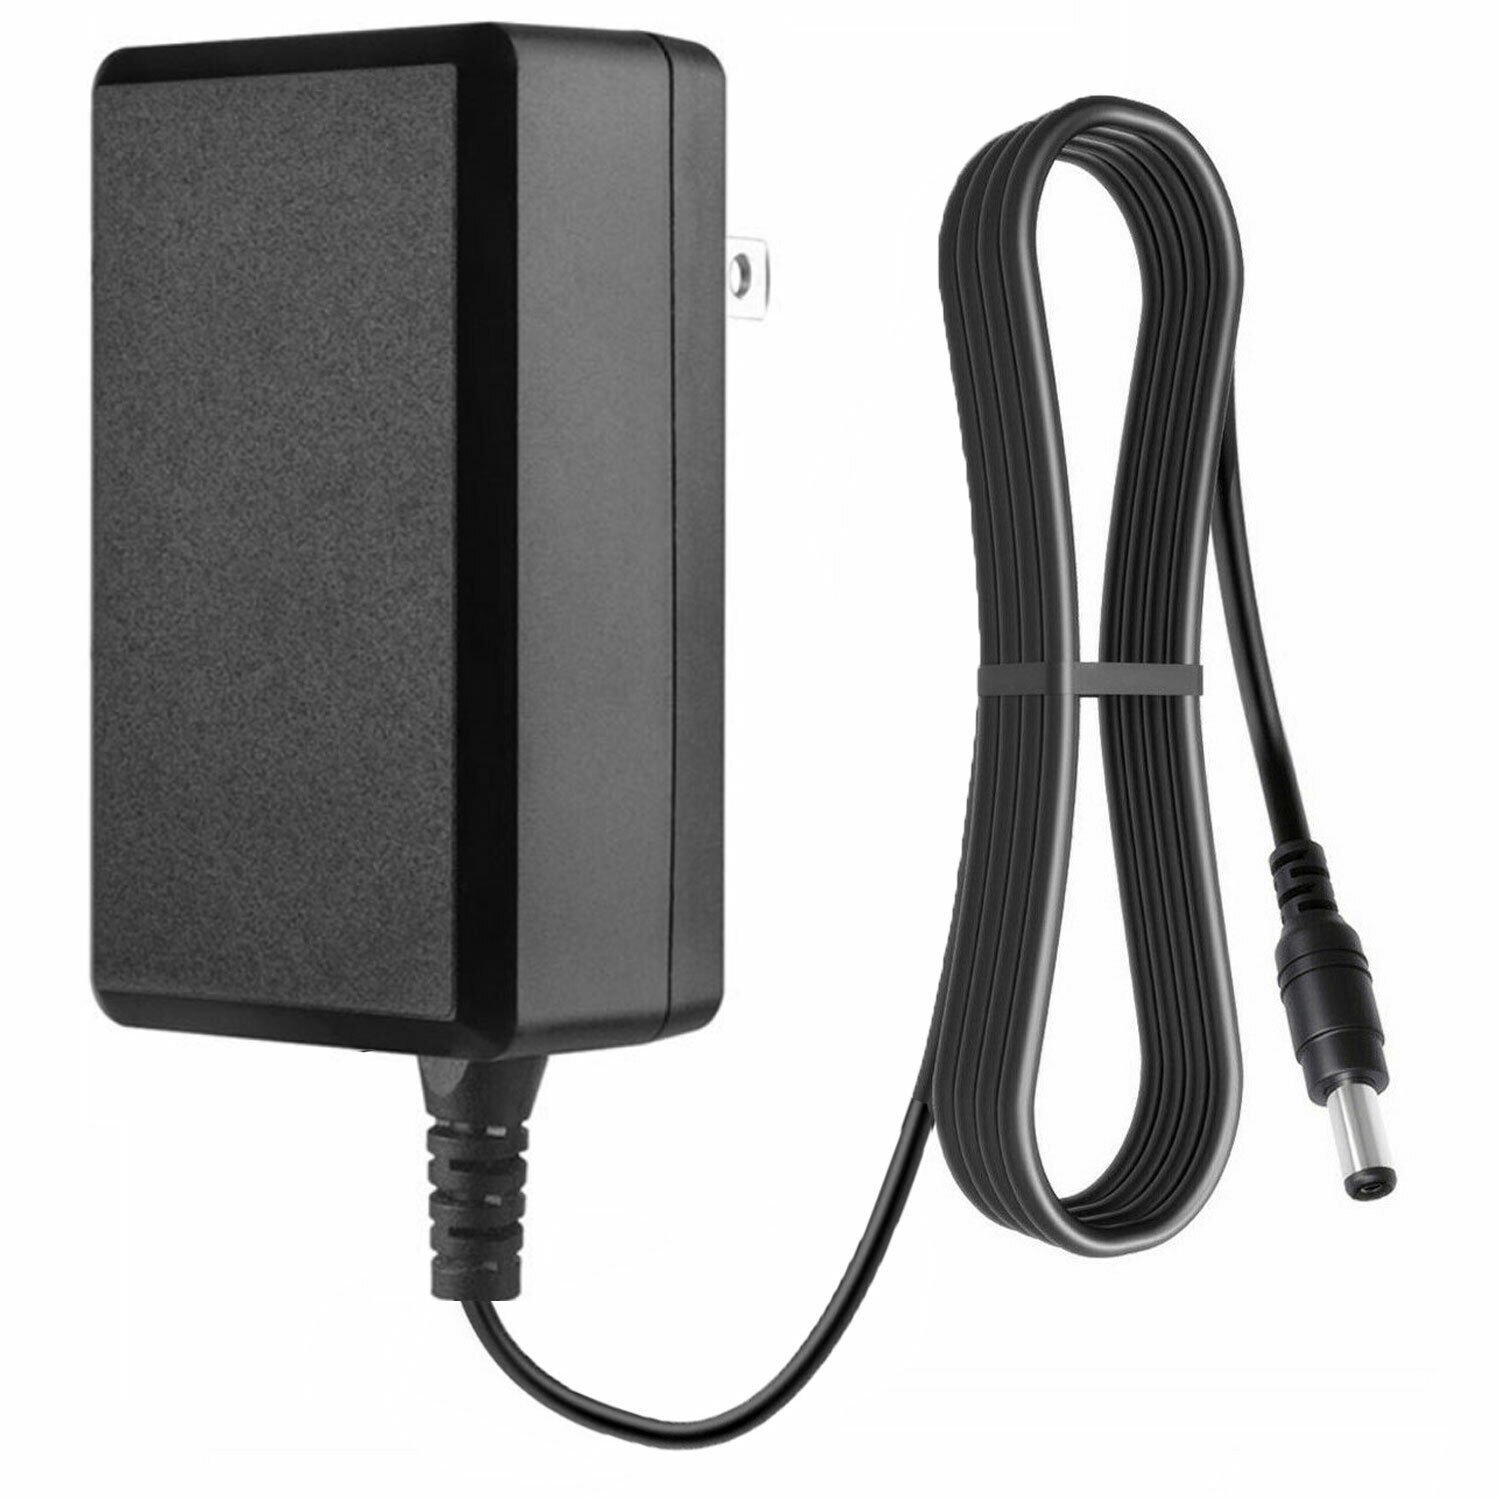 Tineco OEM AC Adapter Power Supply YLS0241A-T260080 26V 800mA Brand: Tineco Compatible Brand: Does not apply Featu